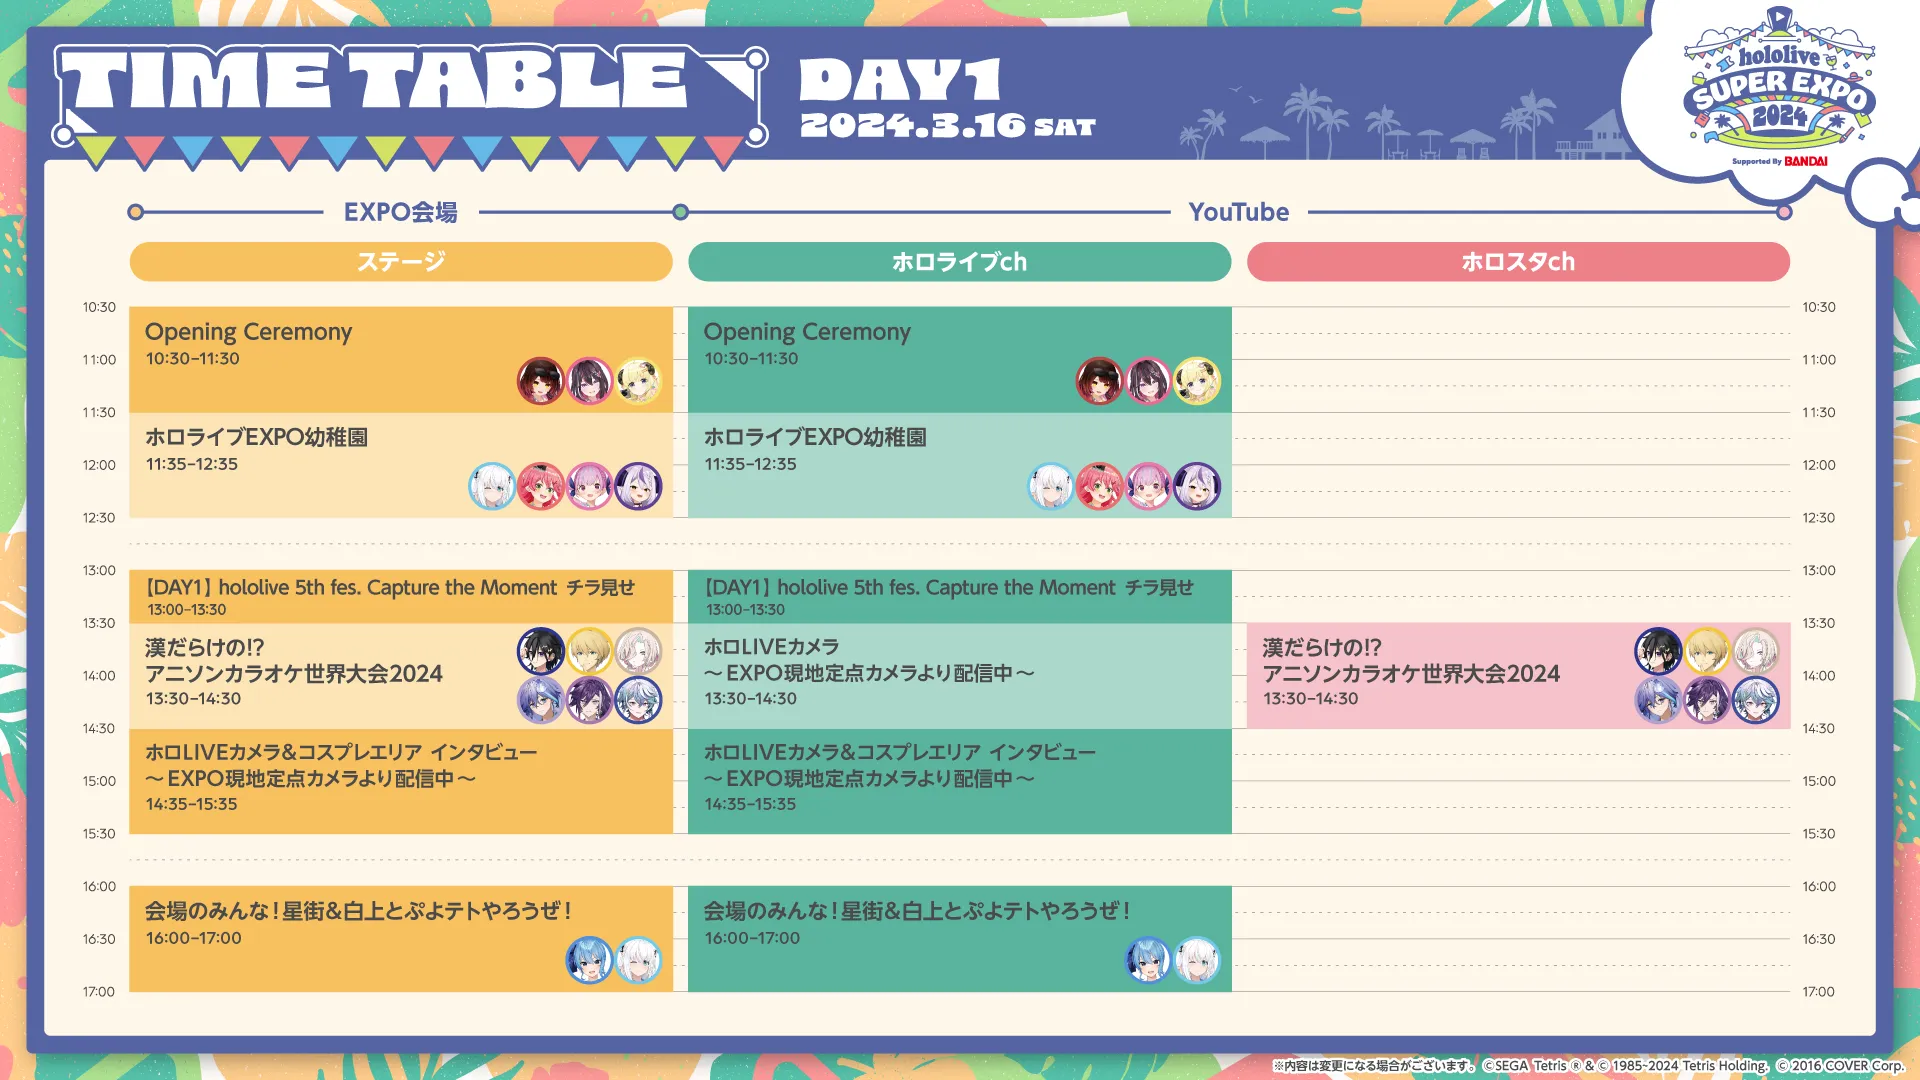 EXPO Stage タイムテーブル DAY1